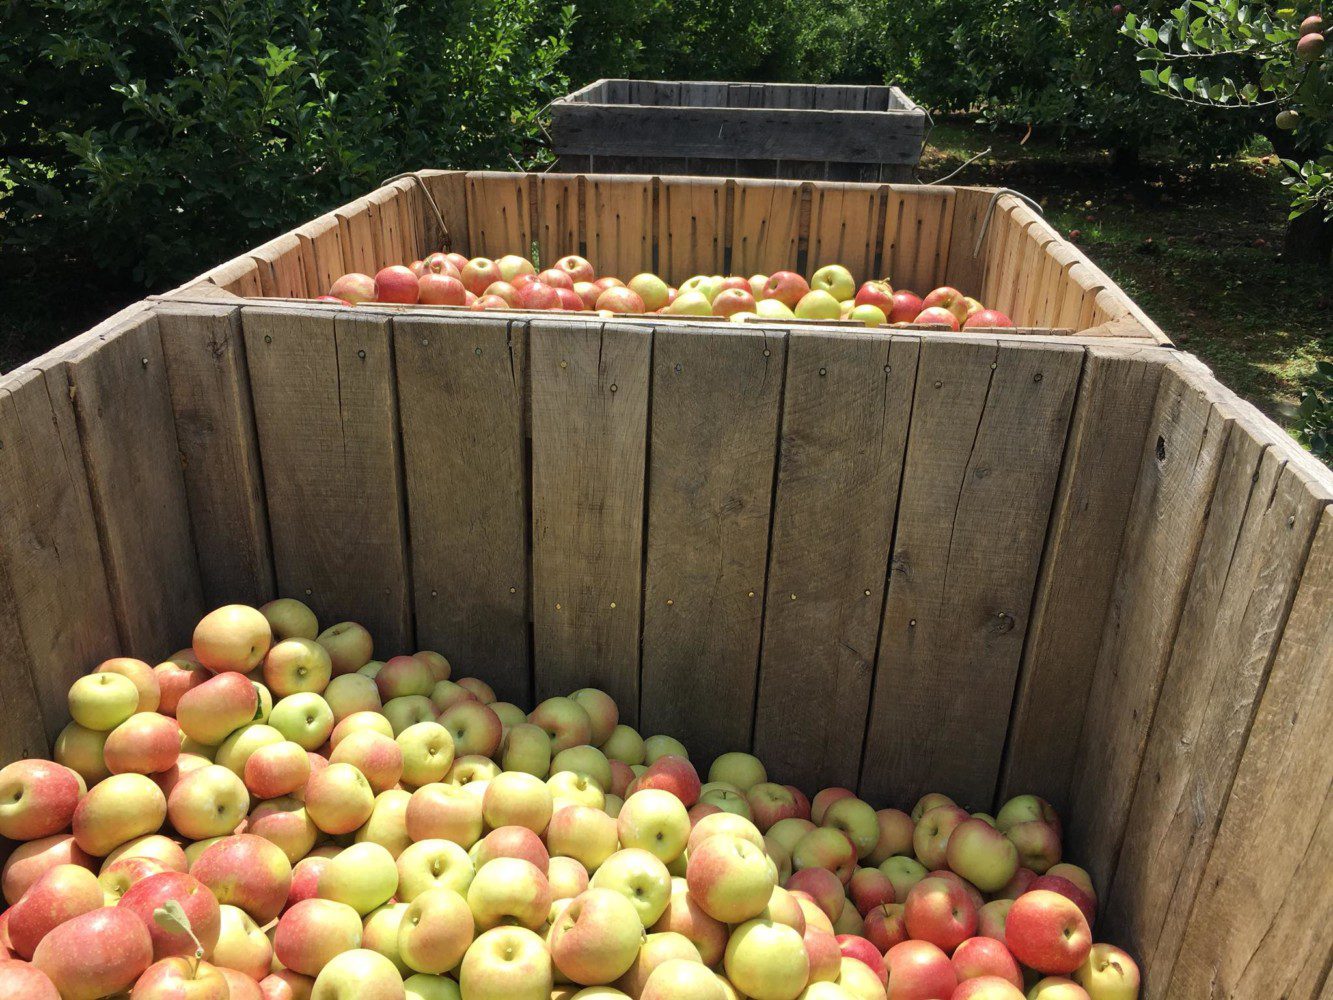 The apple harvest season is underway in South Carolina and Clemson Extension agents are busy helping growers learn how to maximize knowledge and technology to reinvigorate the South Carolina apple industry.